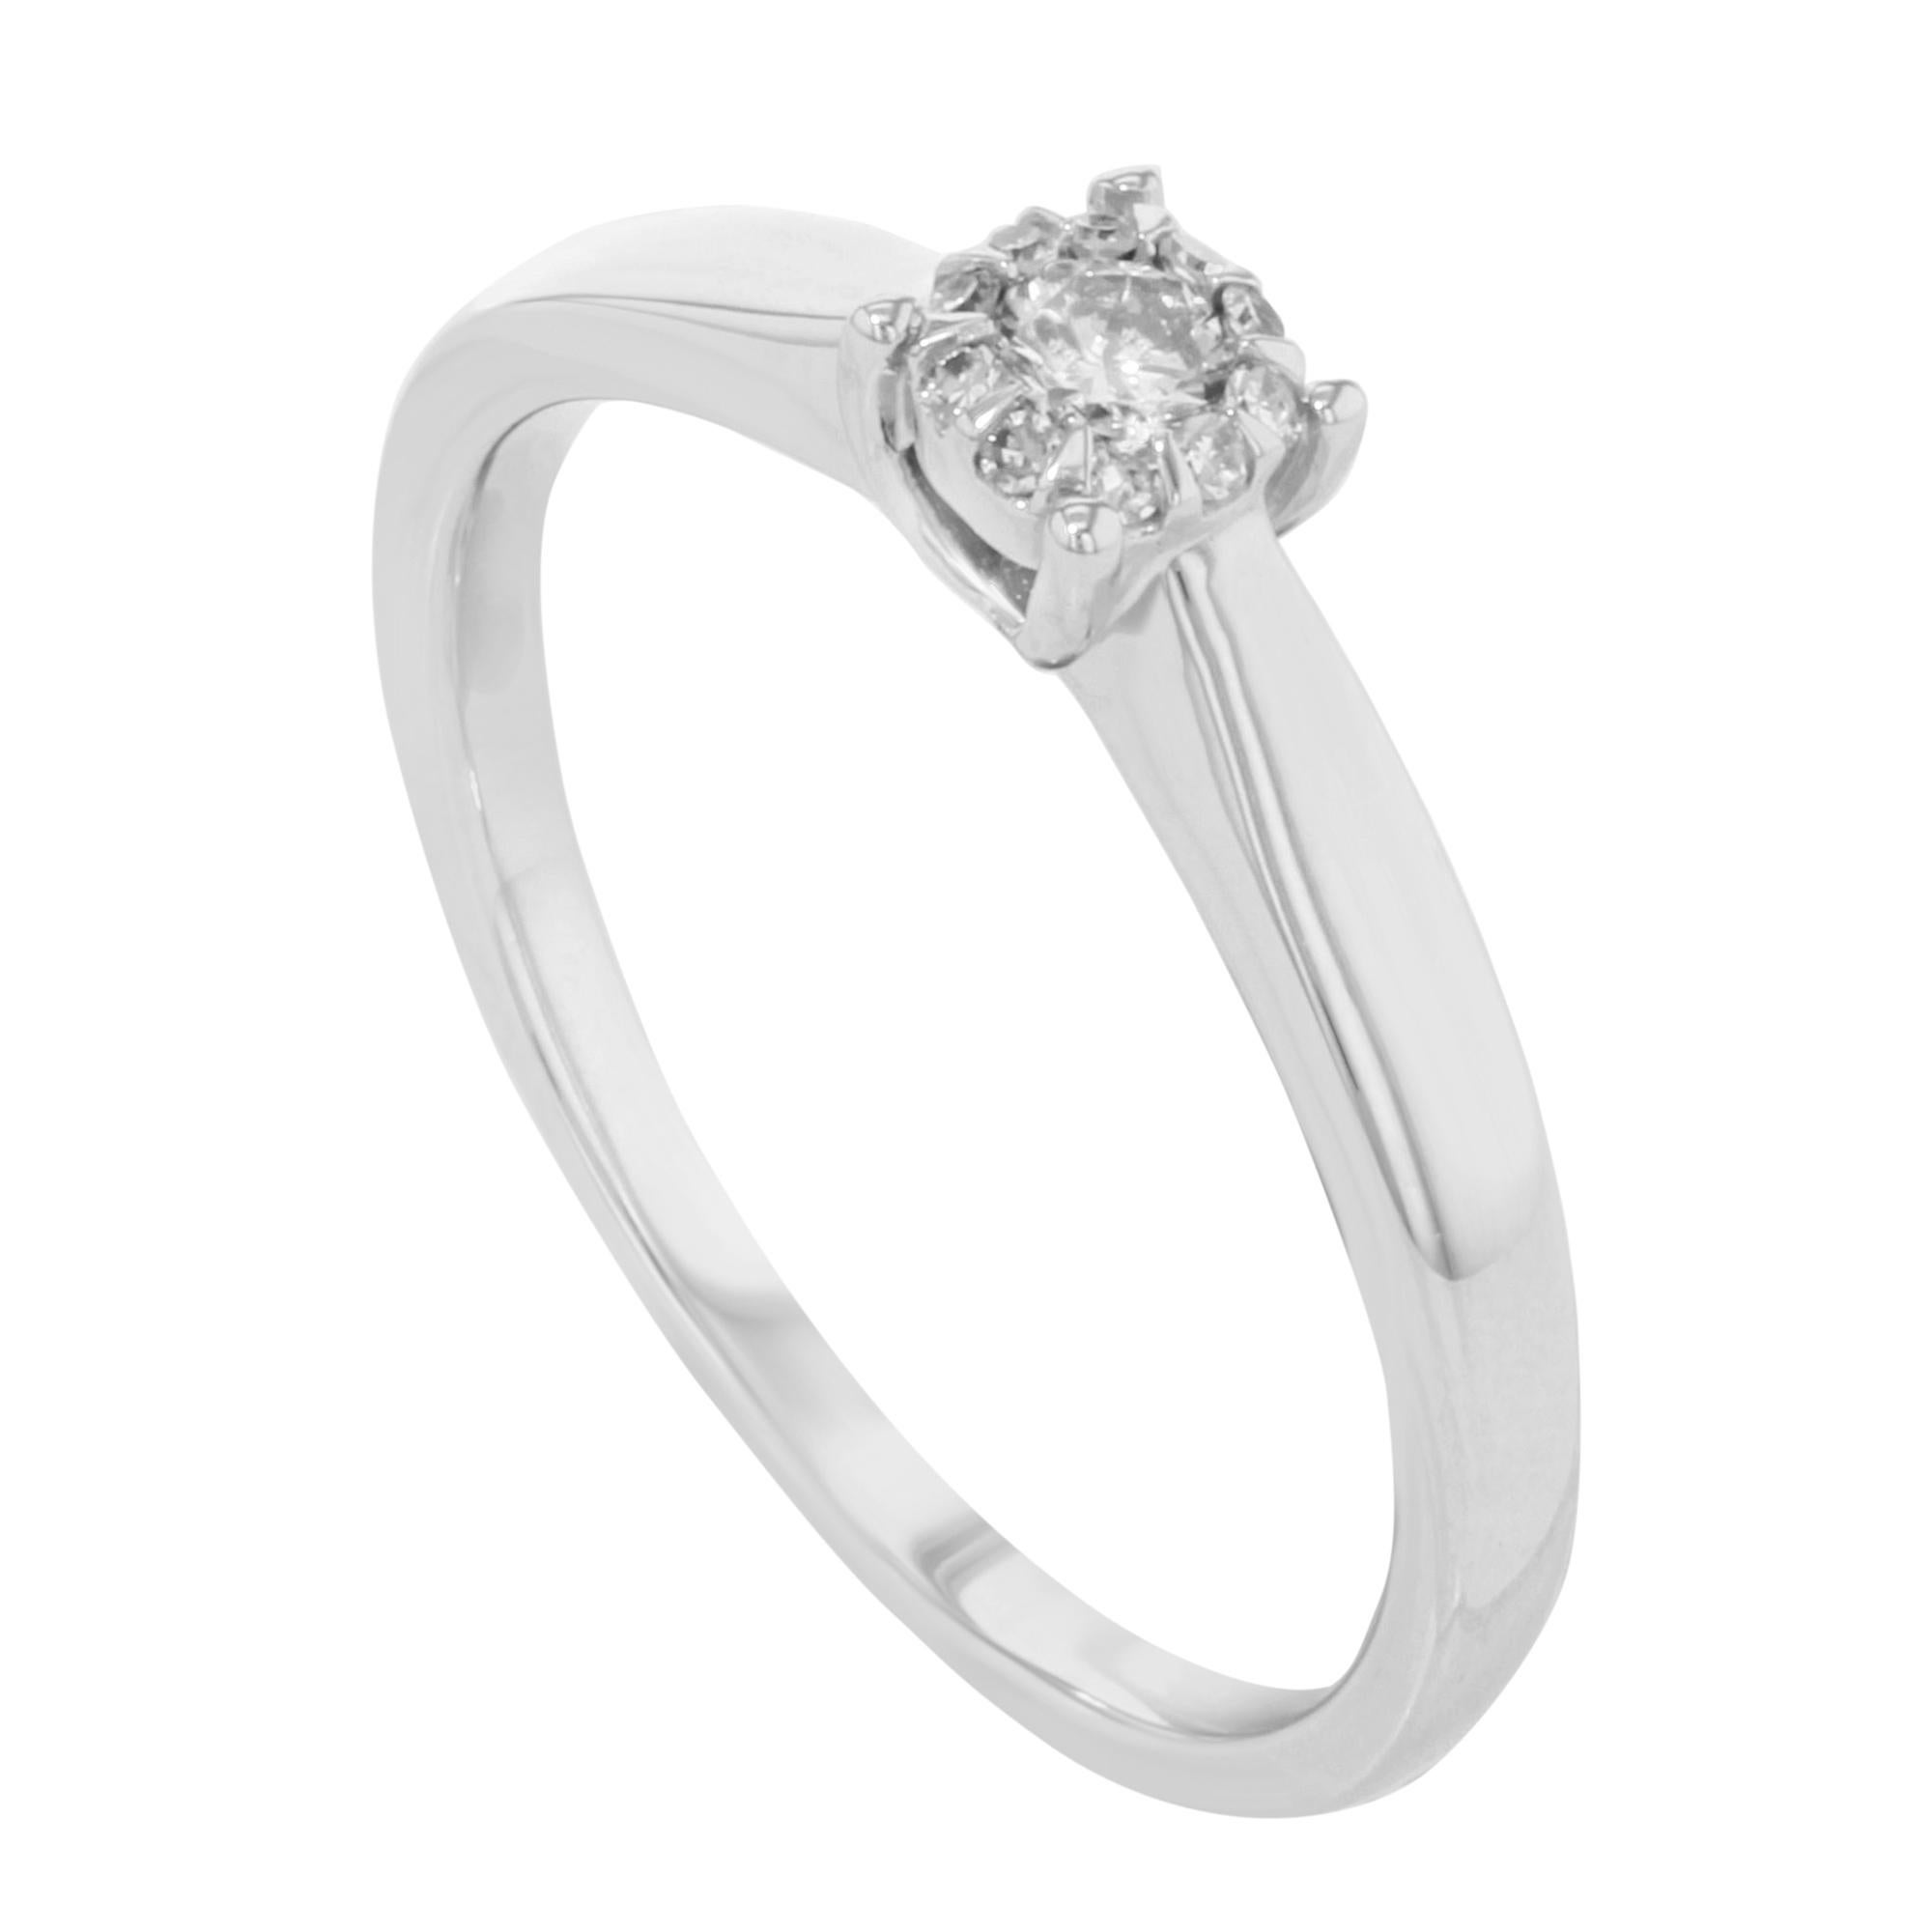 Damiani diamond engagement ring crafted in 18K white gold. Beautiful 0.12cts round cut diamonds. This ring lets you have the experience of a much more expensive diamond ring for a fraction of the price, without sacrificing any of the beauty.